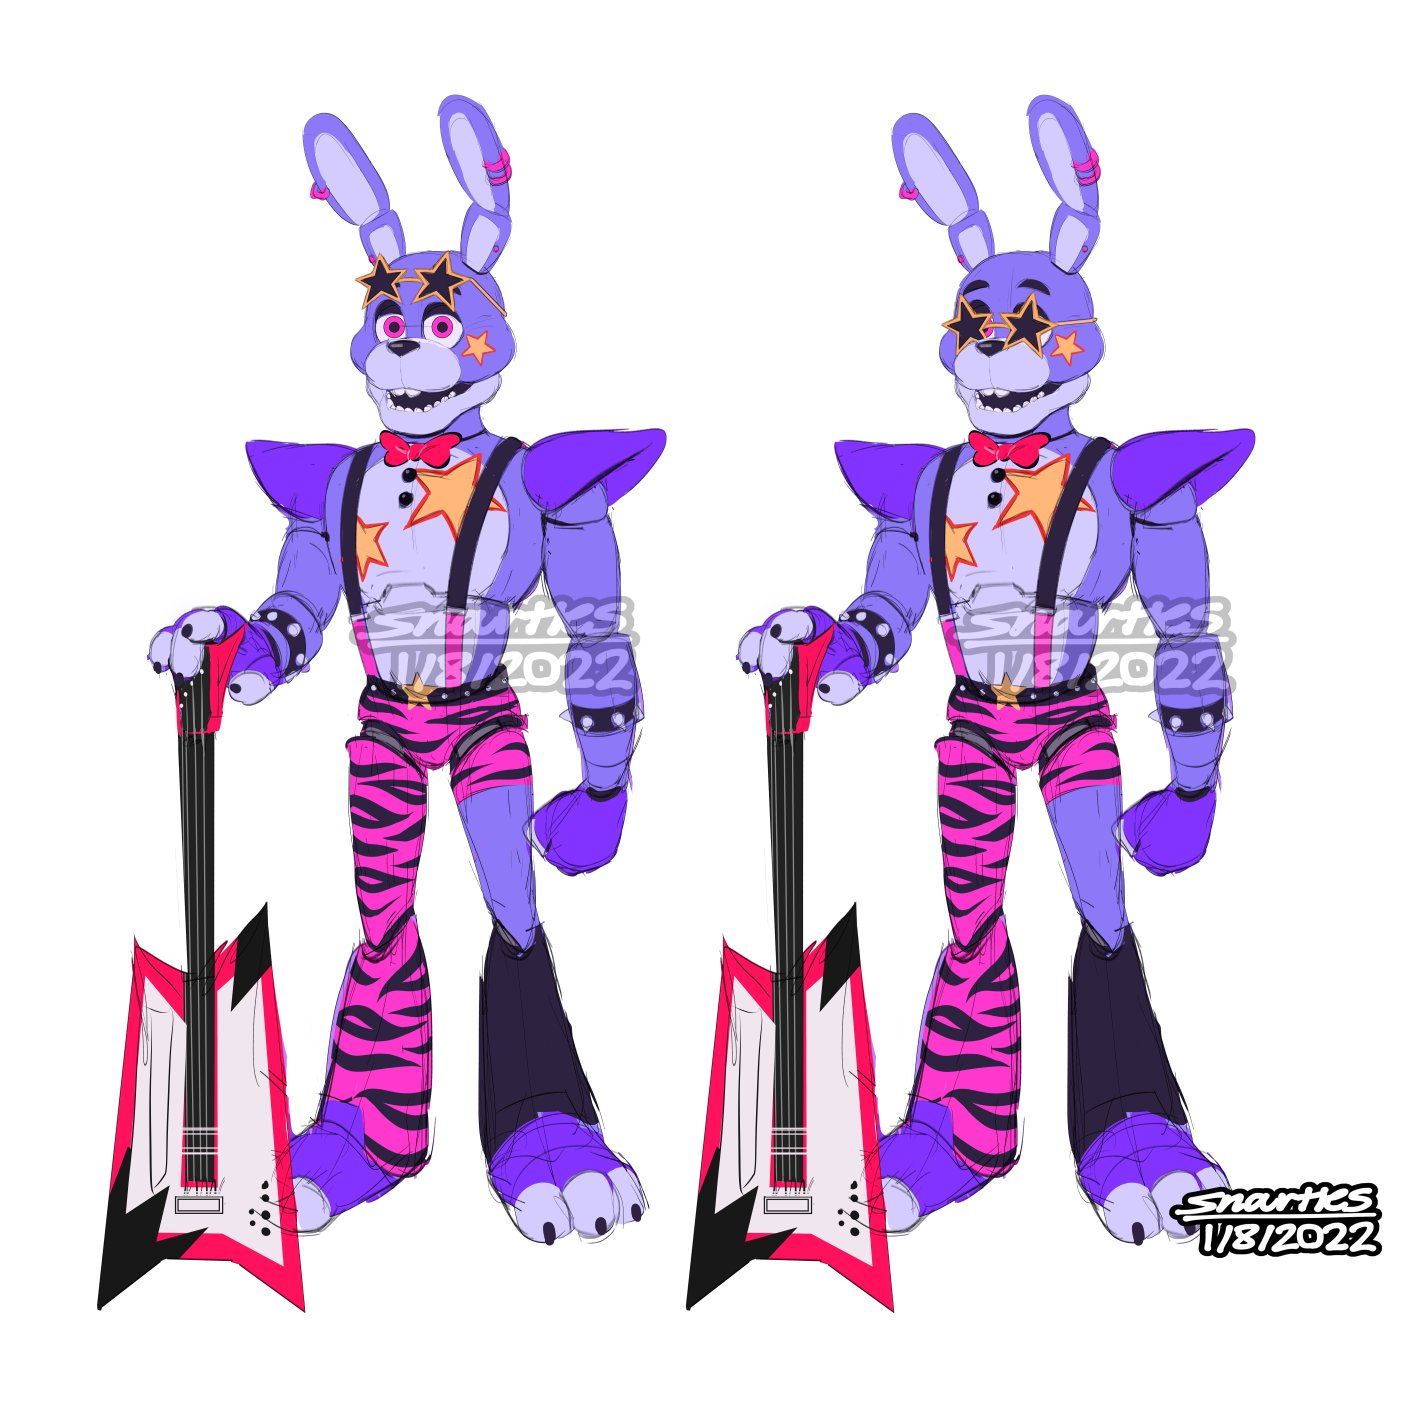 Glamrock Bonnie over Monty! [Five Nights at Freddy's Security Breach] [Mods]